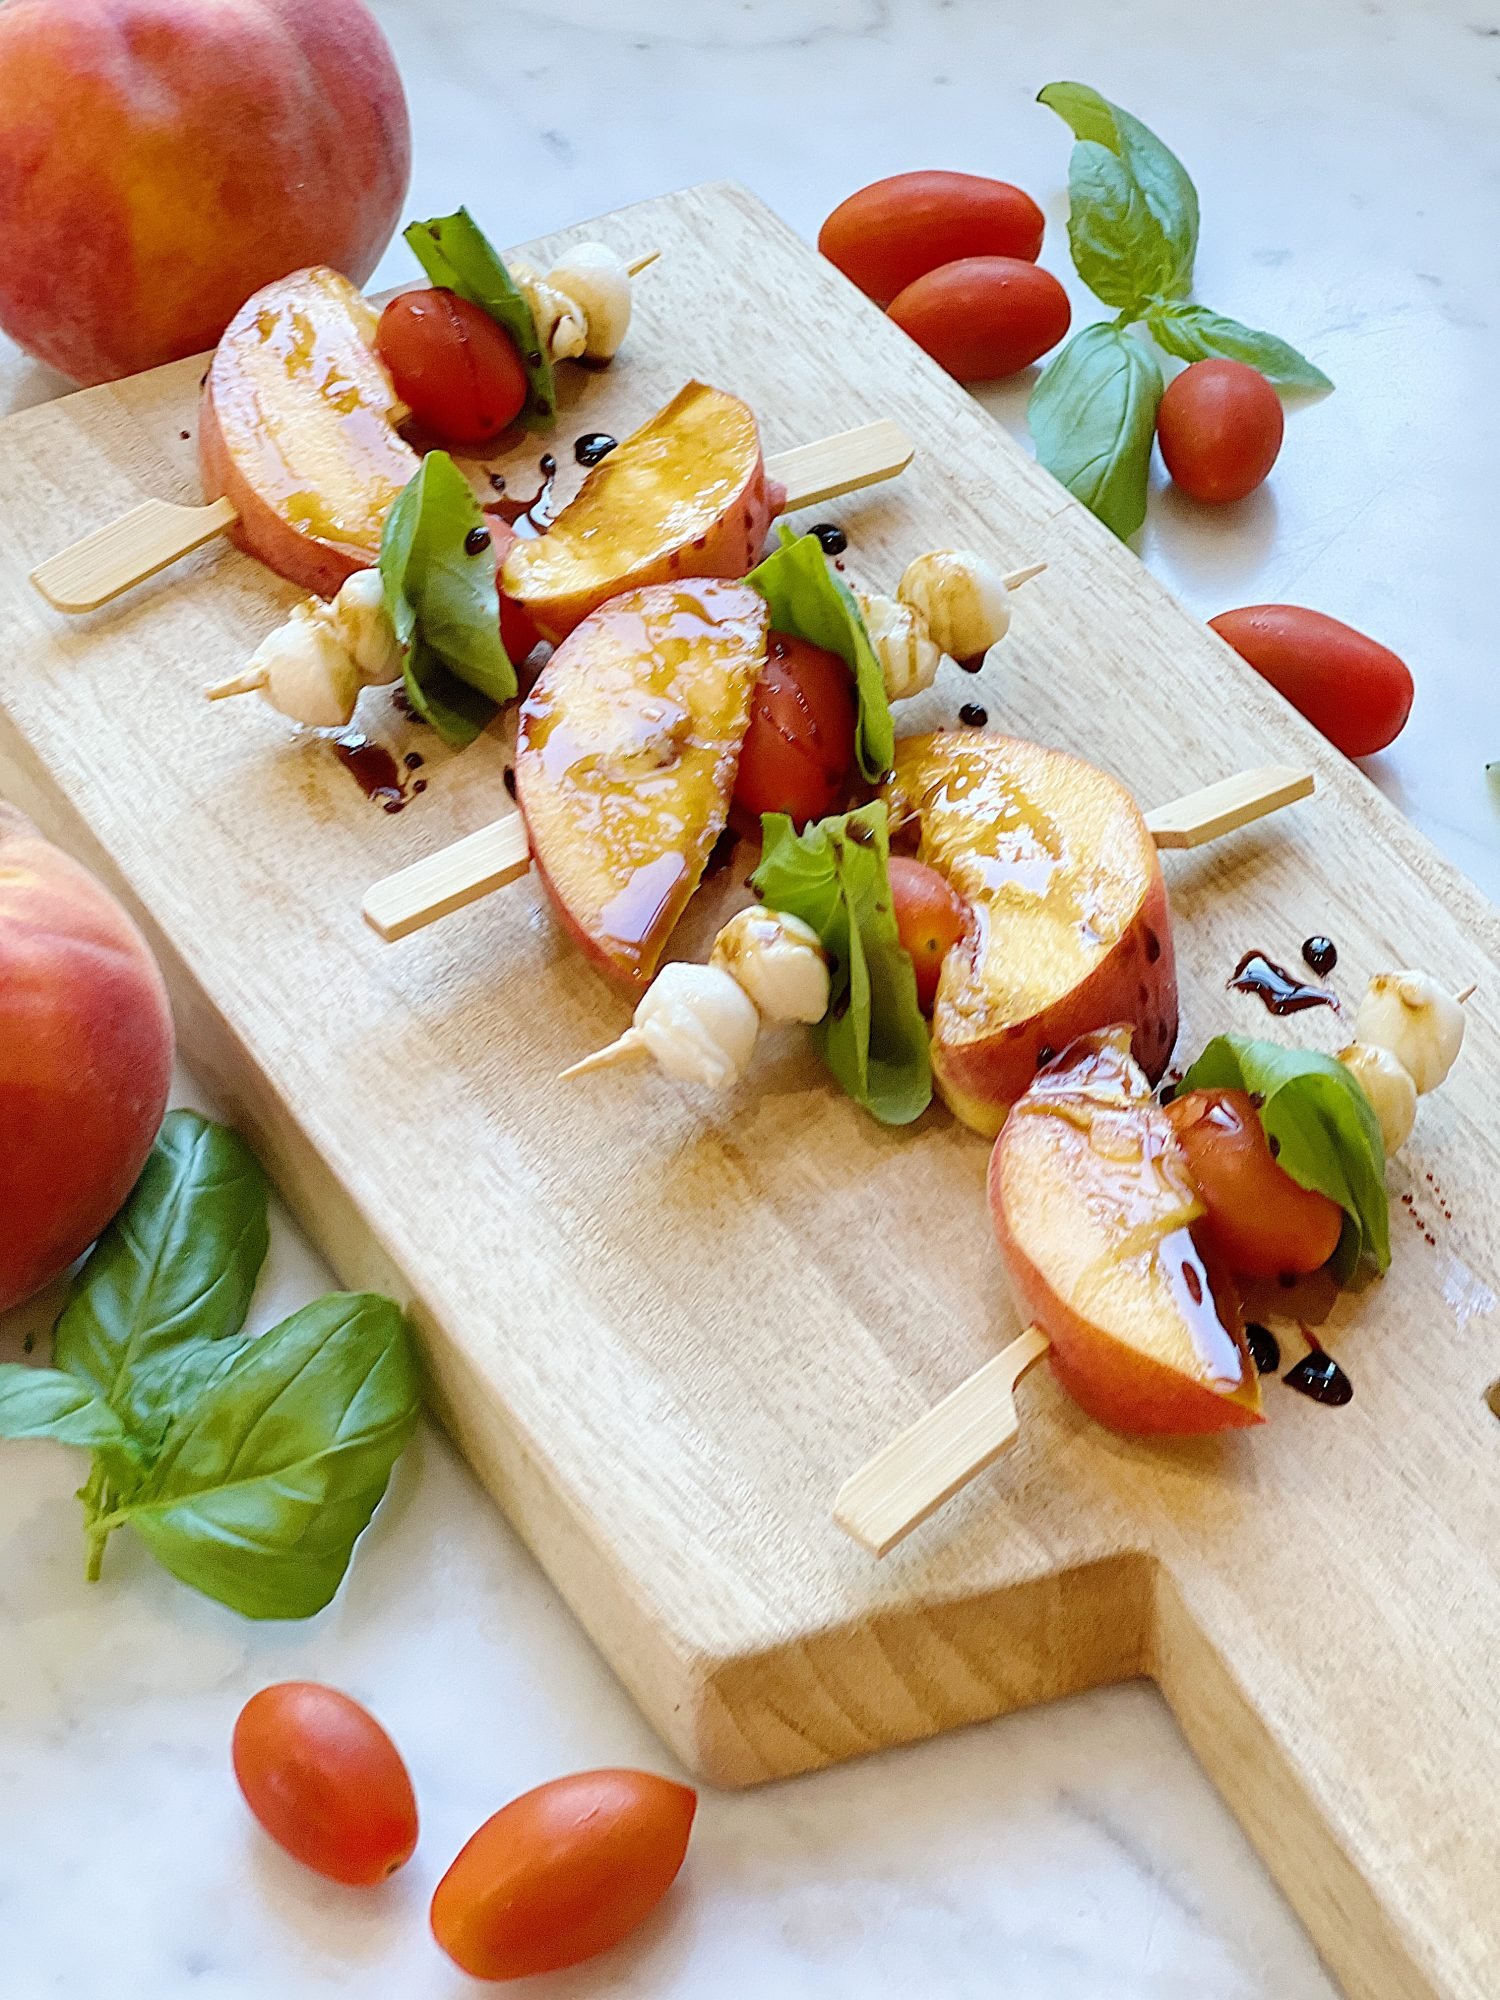 Skewers of peaches, tomato, basil and mozarella, with a balsamic glaze.